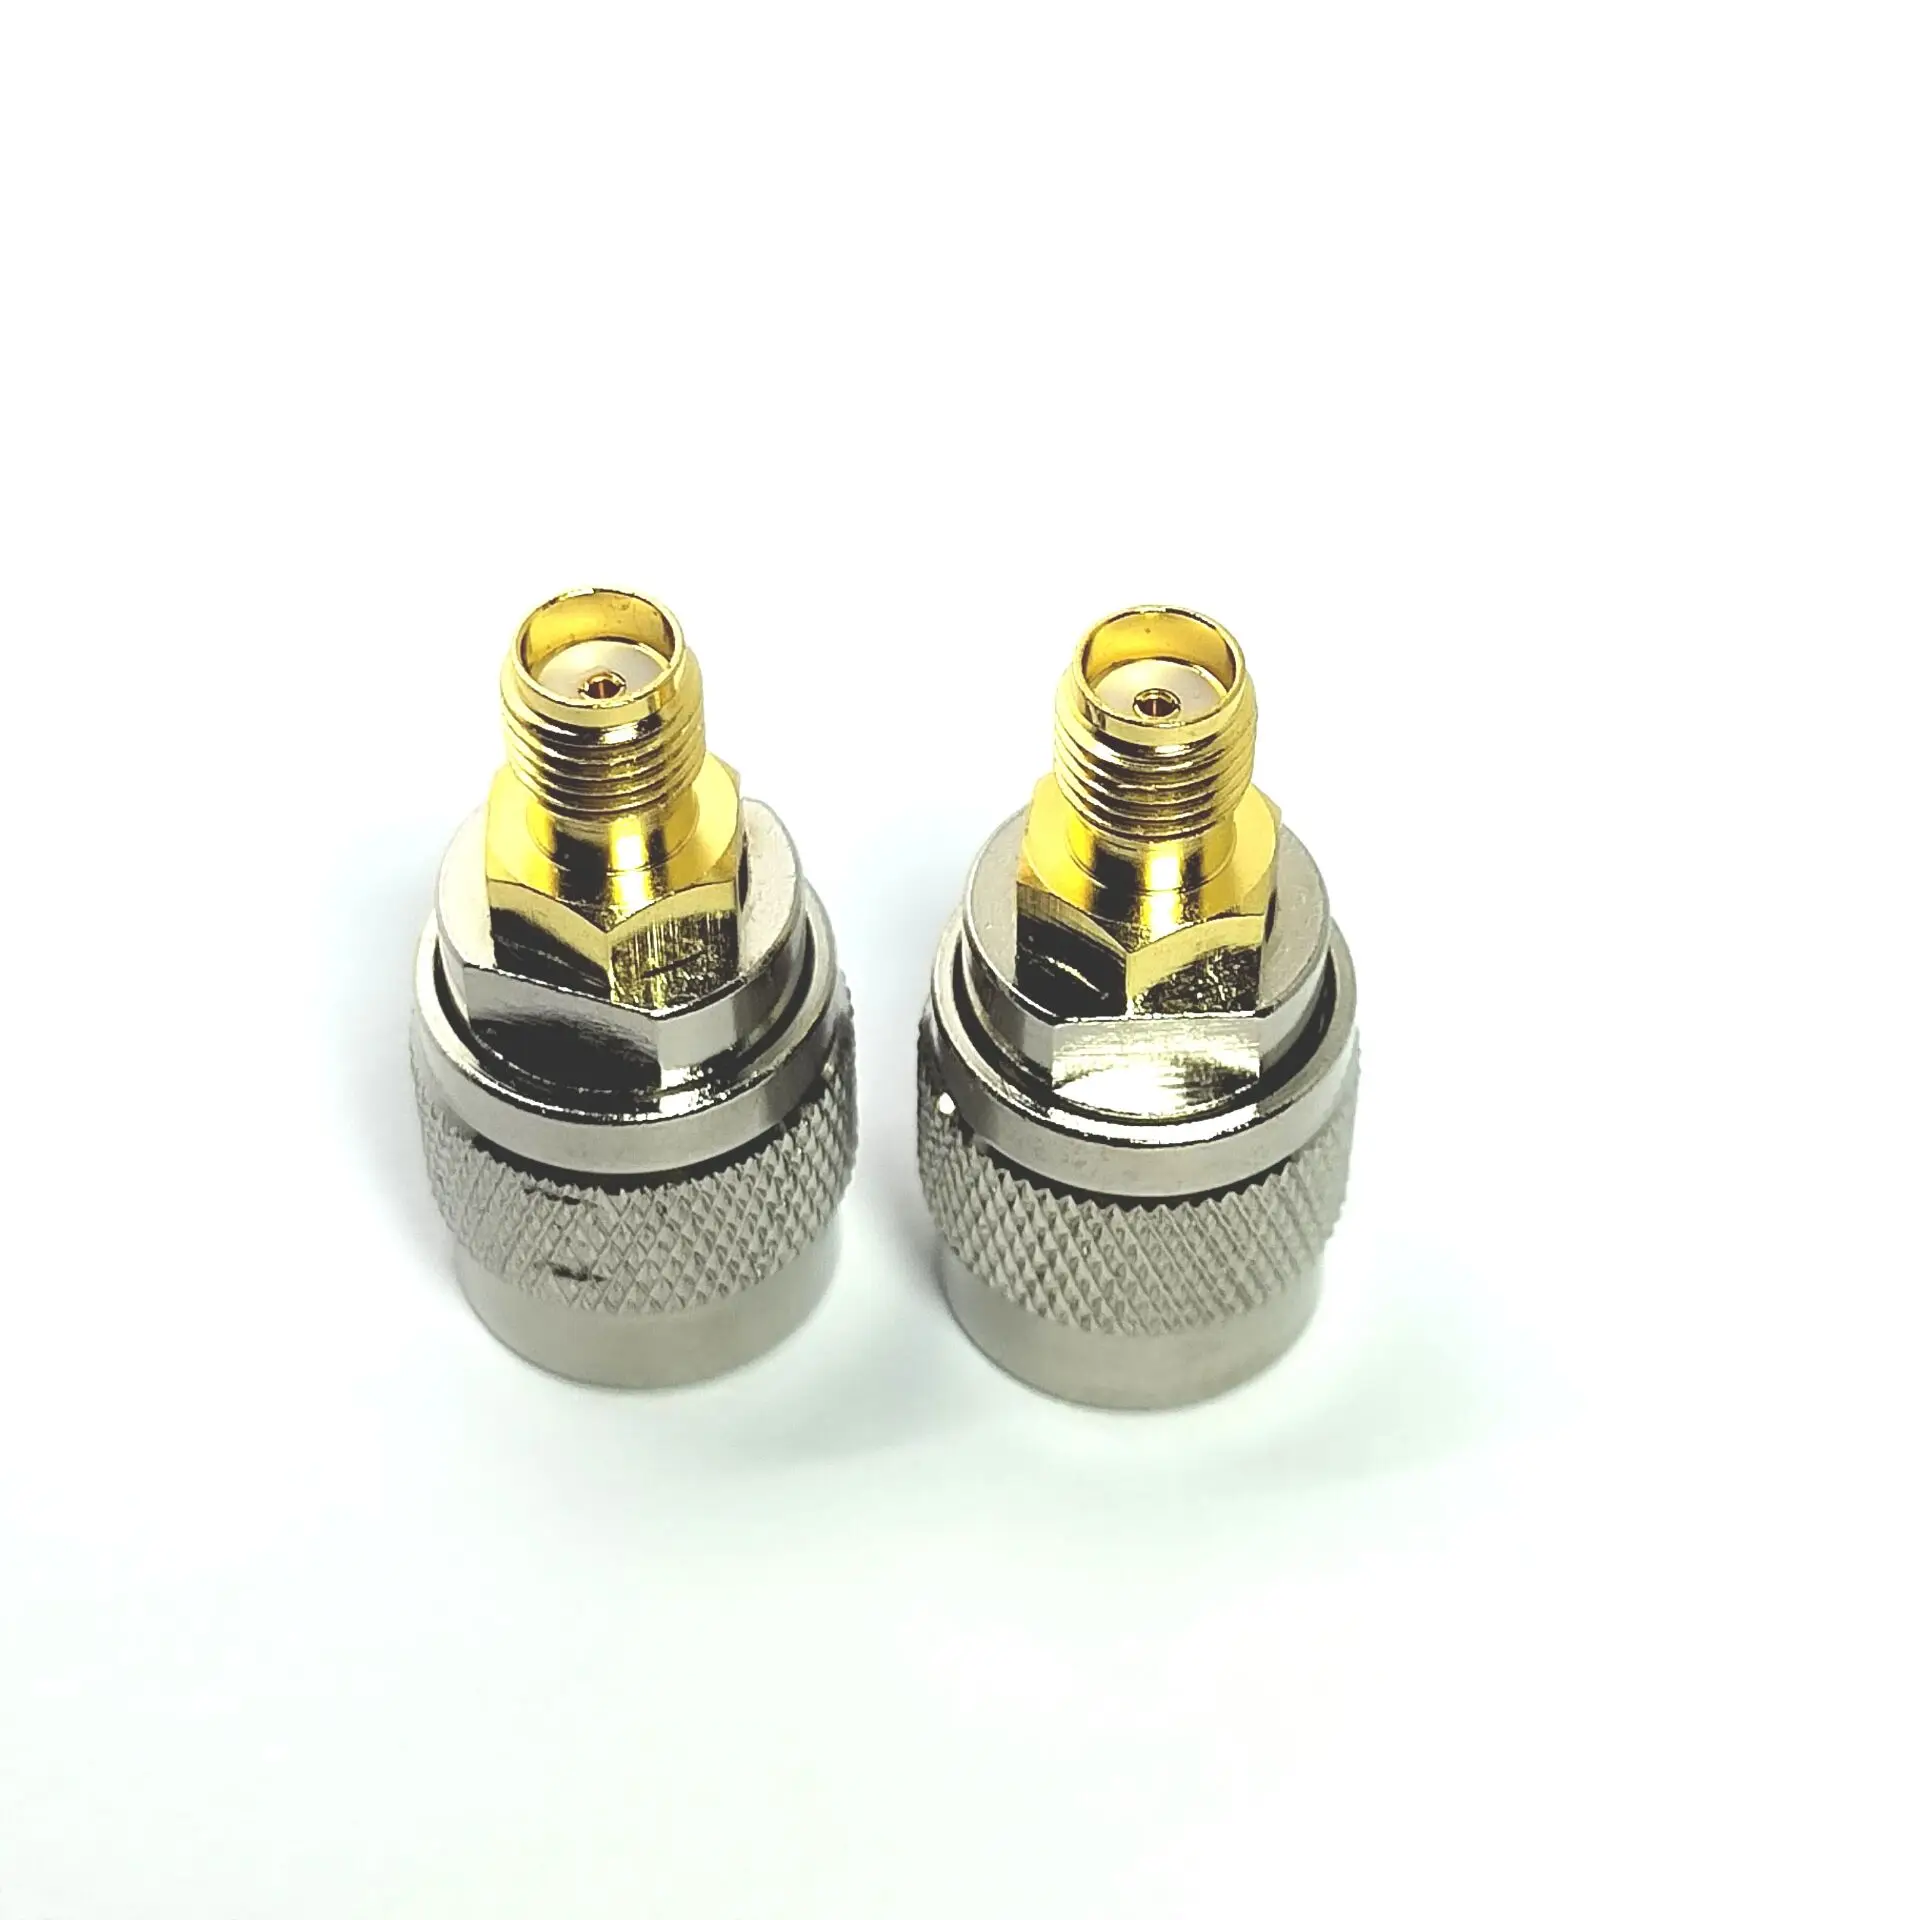 Factory supply  RF adaptor sma female jack  to RP  tnc male Reverse polarity tnc plug  rf coaxial adapter factory